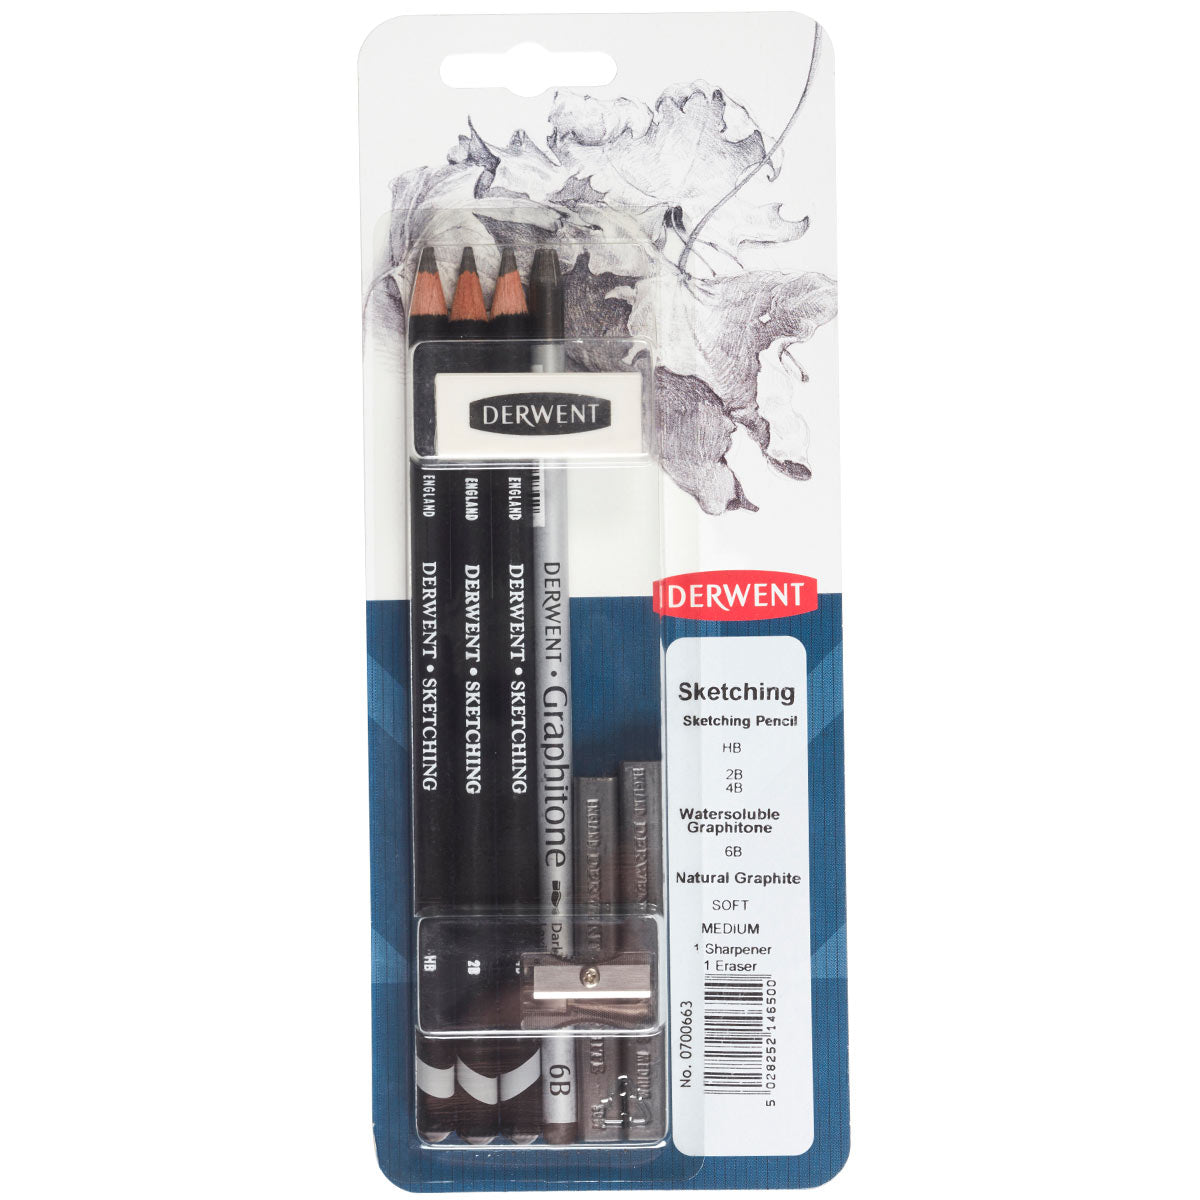 Derwent - Mixed Media Blister 8 Pack - Sketching Pencil